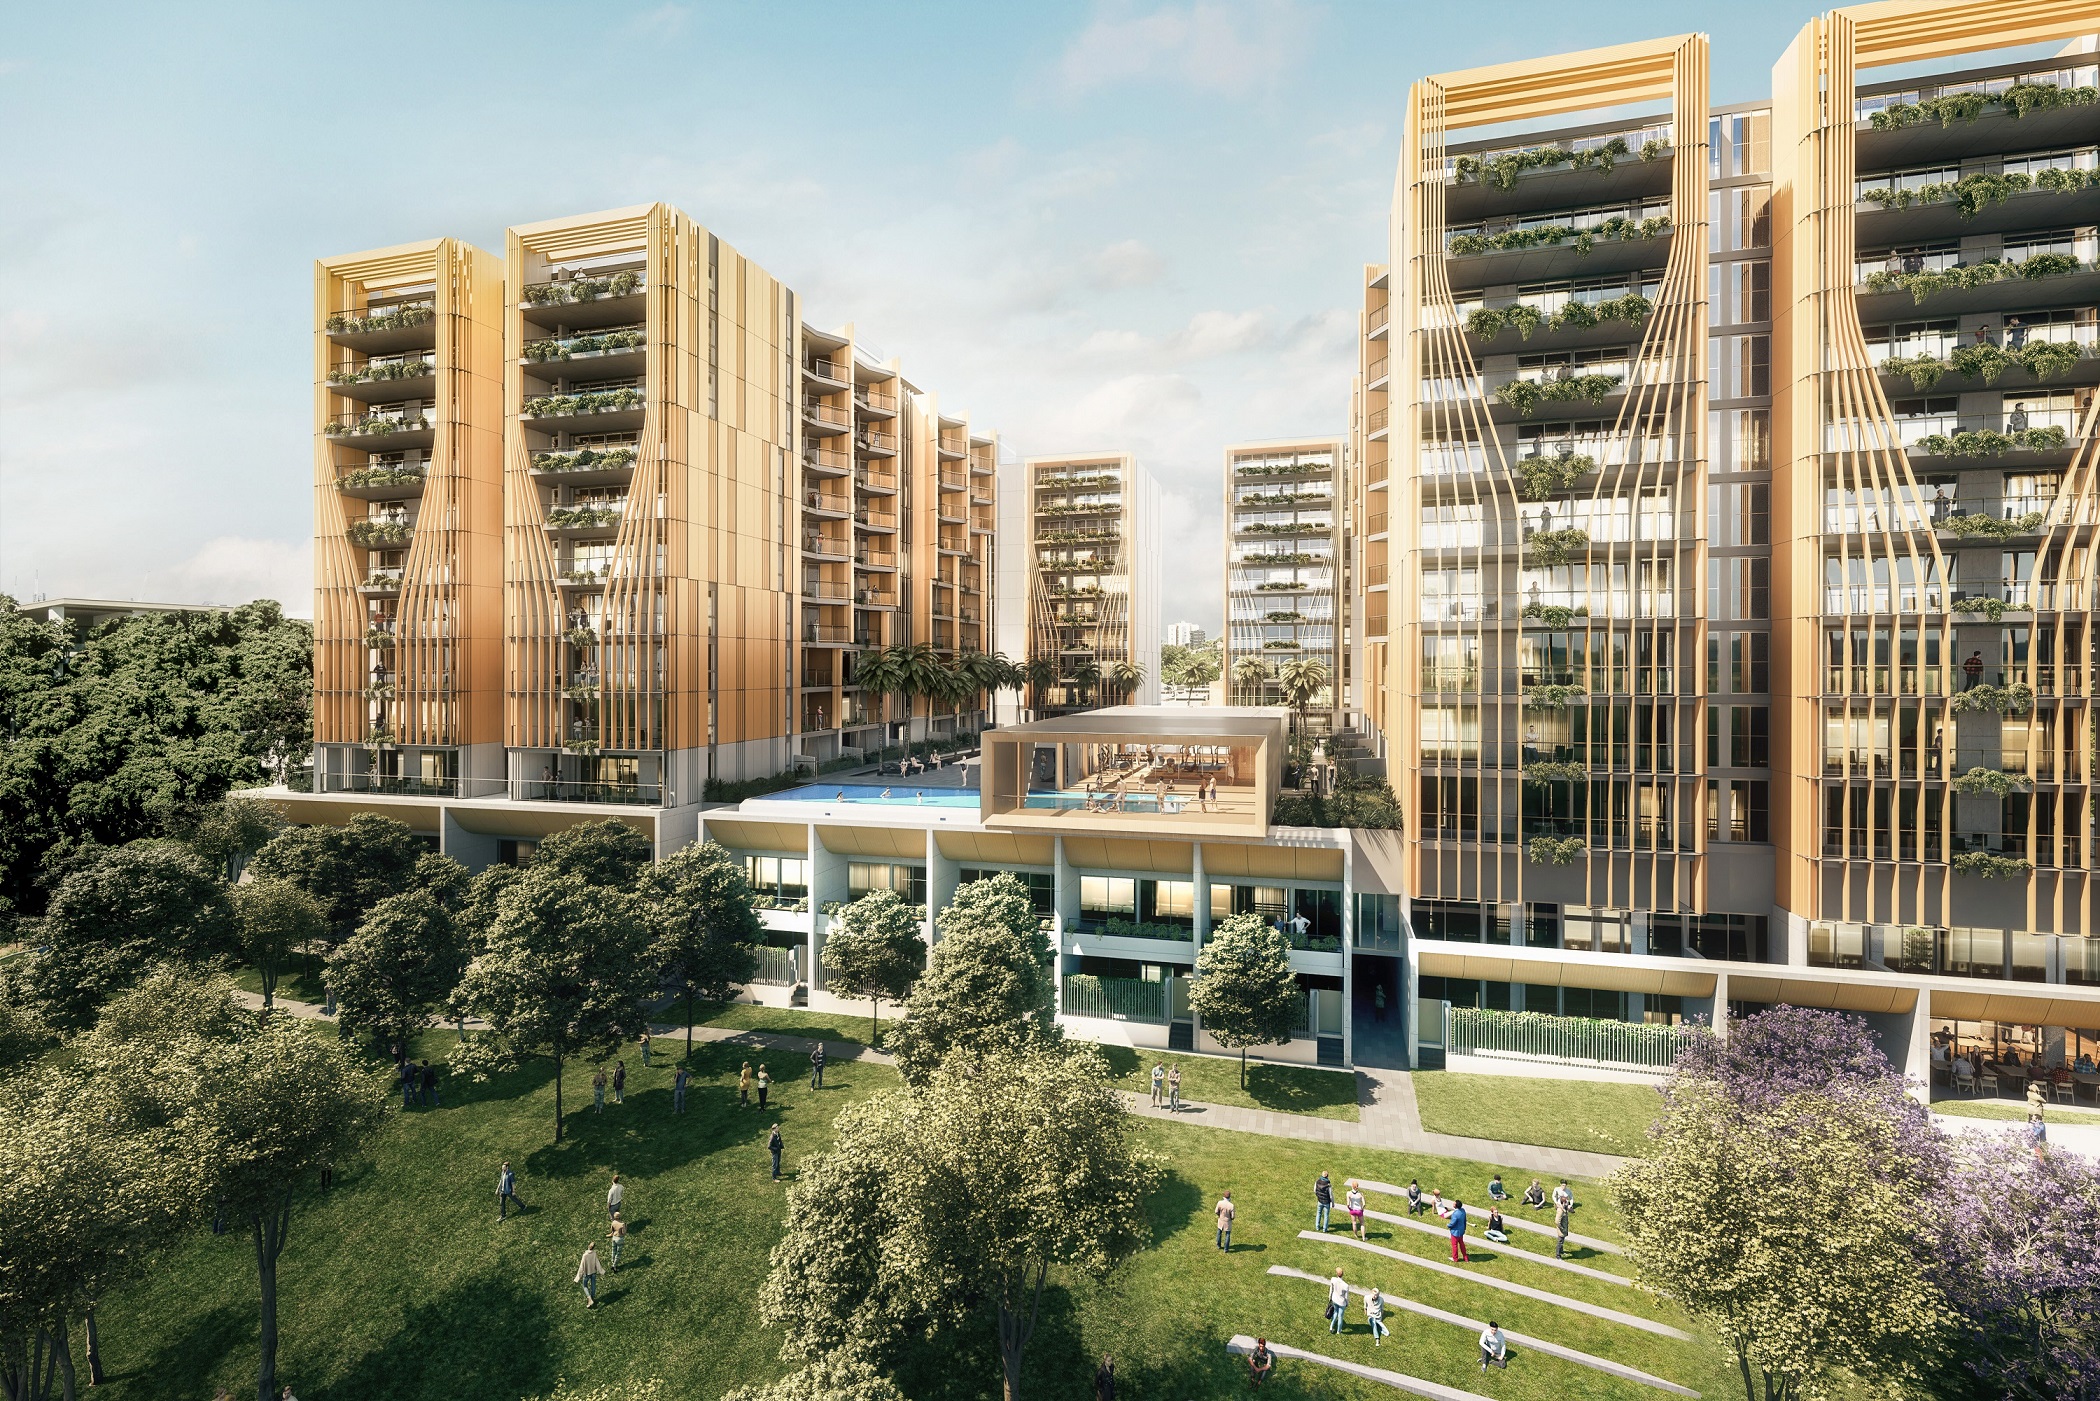 Crown Group's first Brisbane project